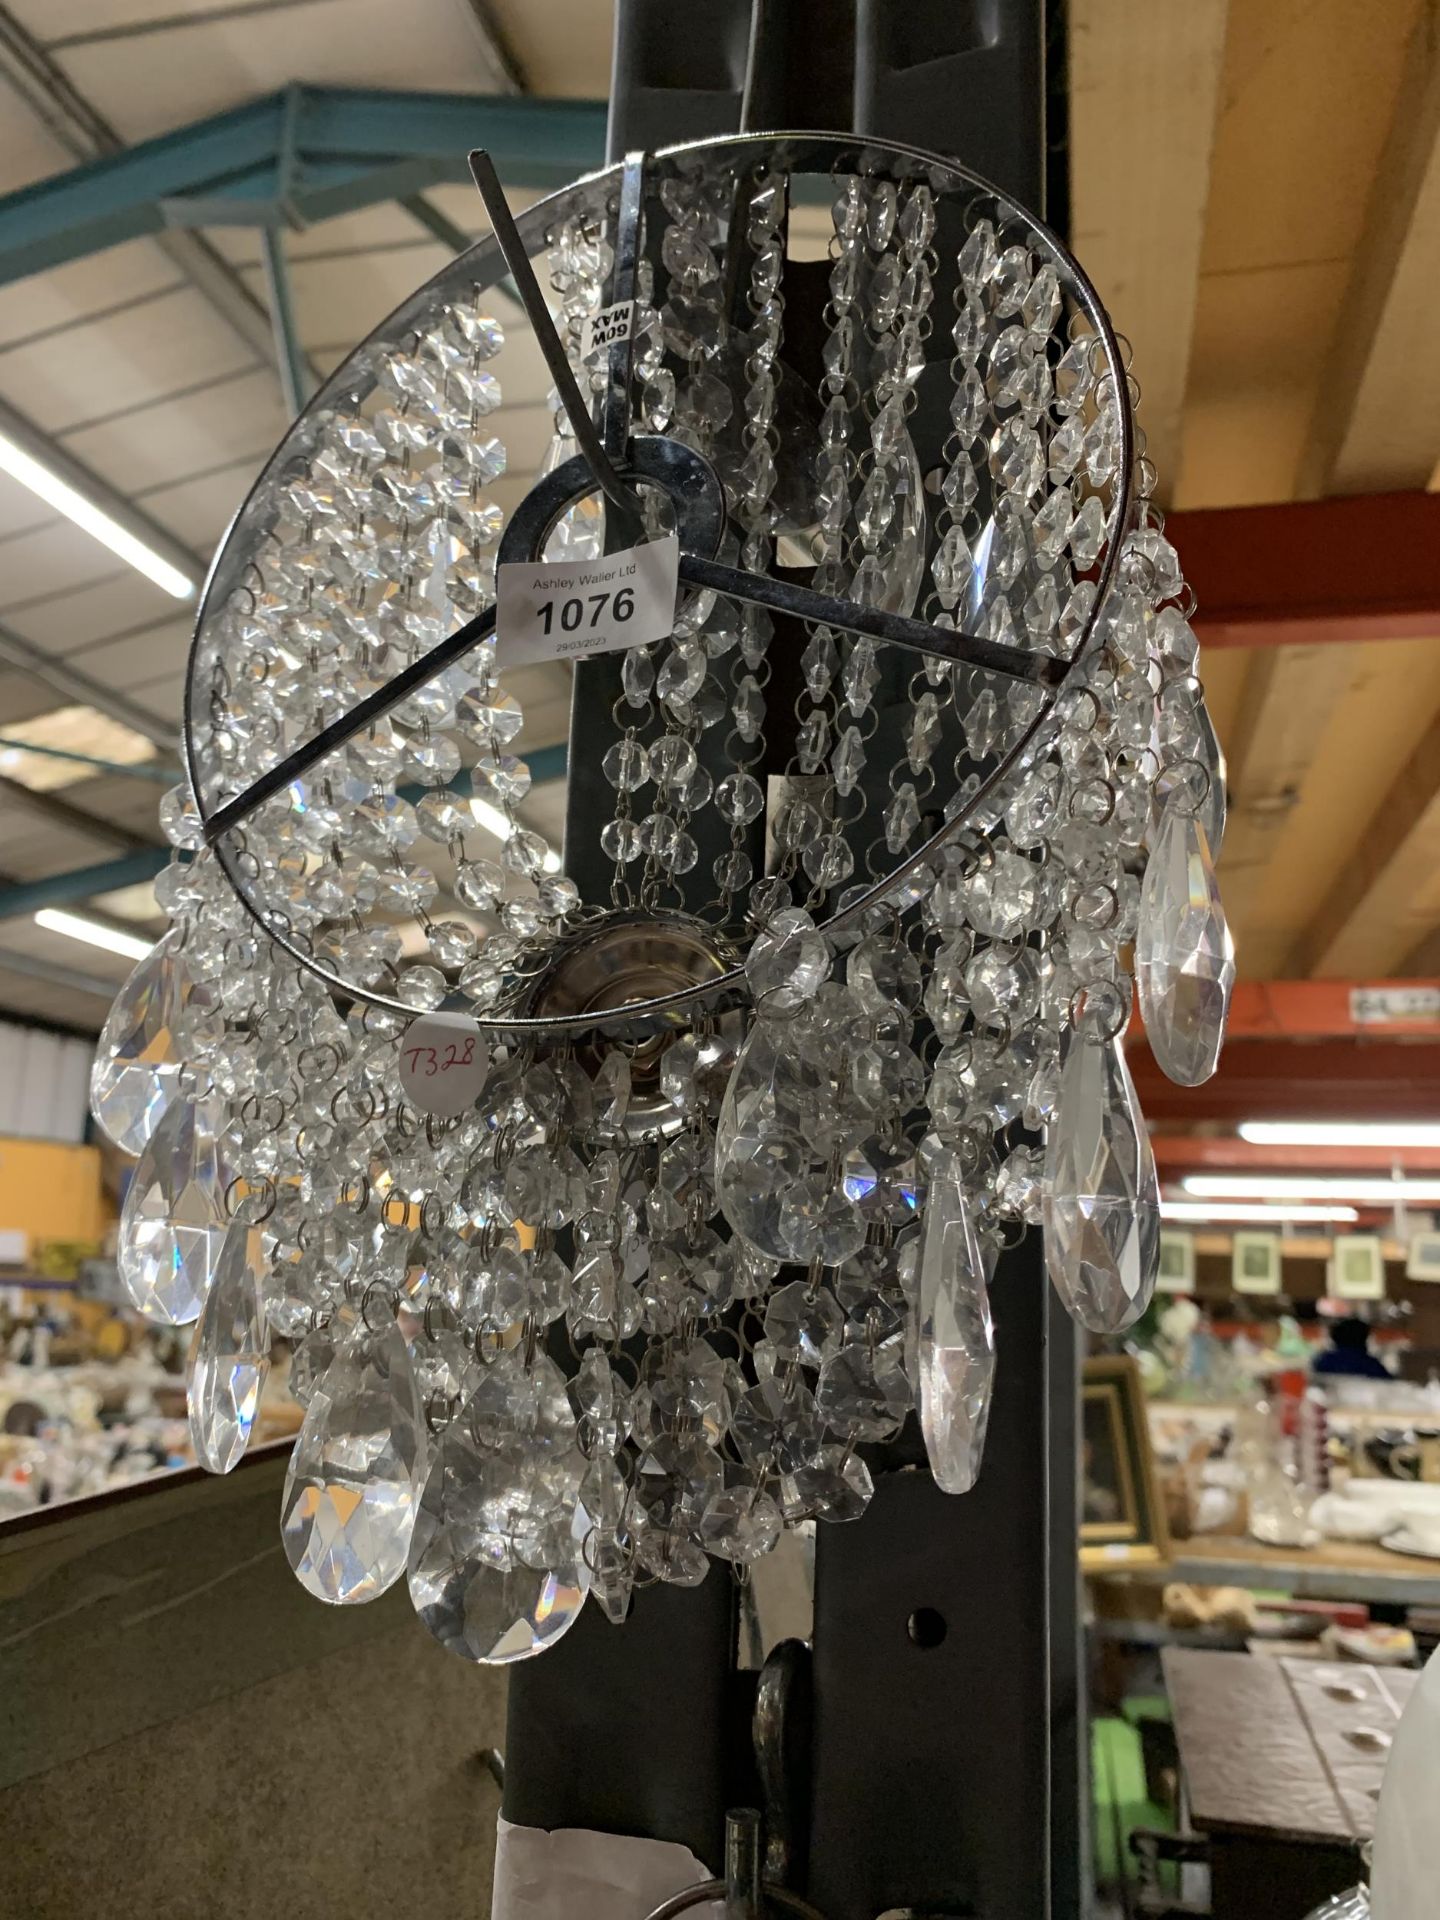 A CEILING LAMP SHADE WITH CRYSTAL DROPLETS